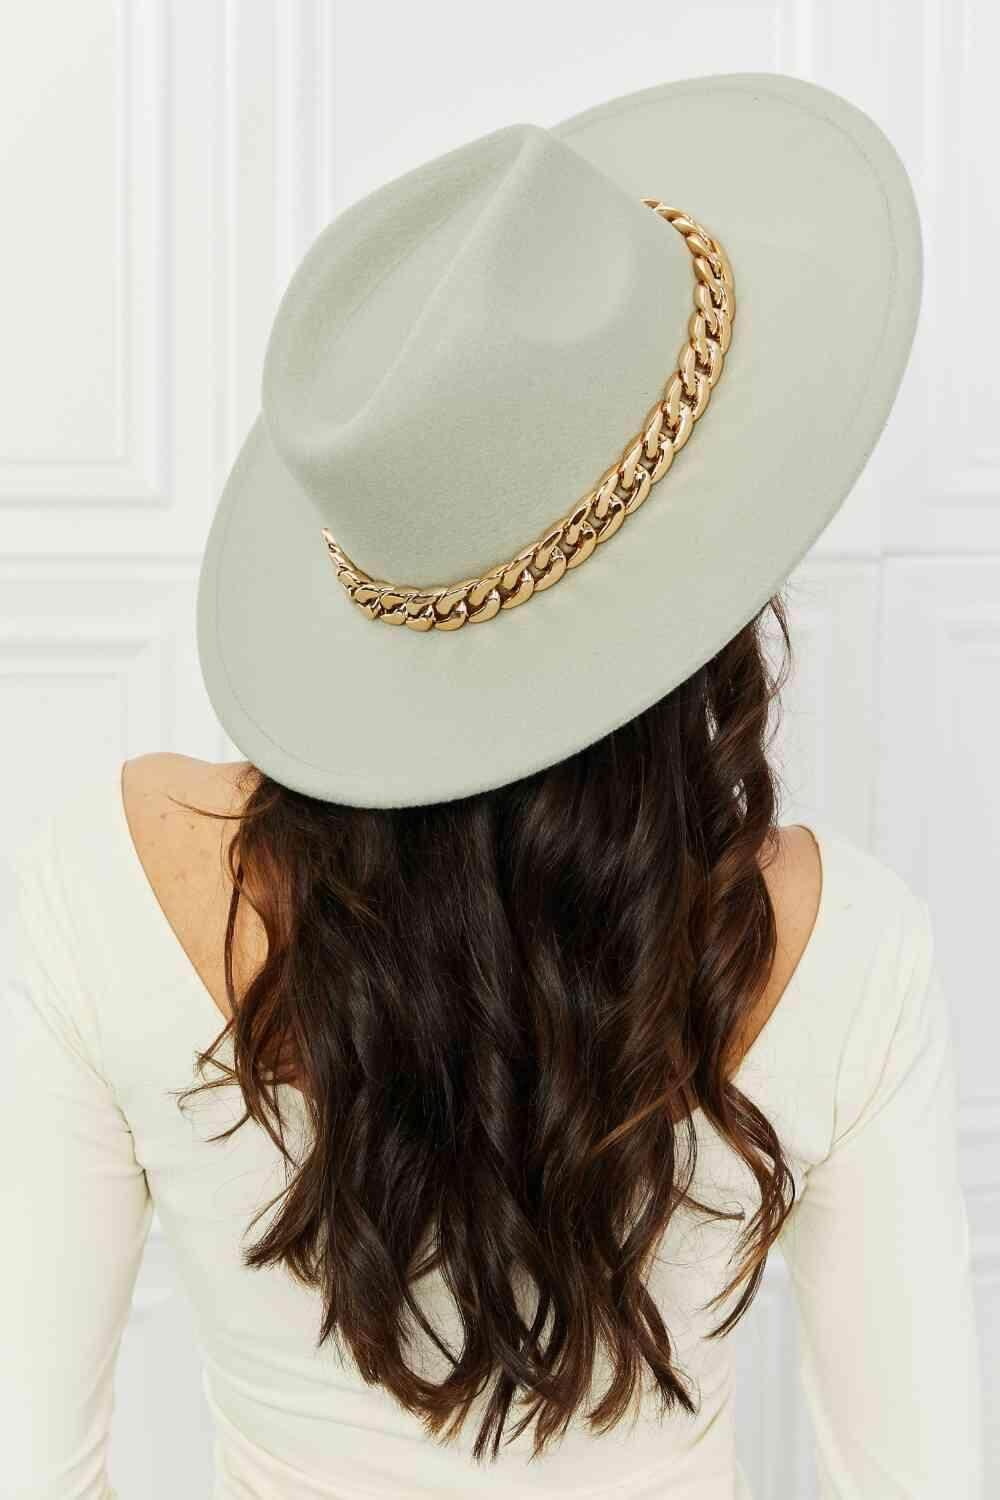 Fame Keep Your Promise Fedora Hat in Mint - Trendociti